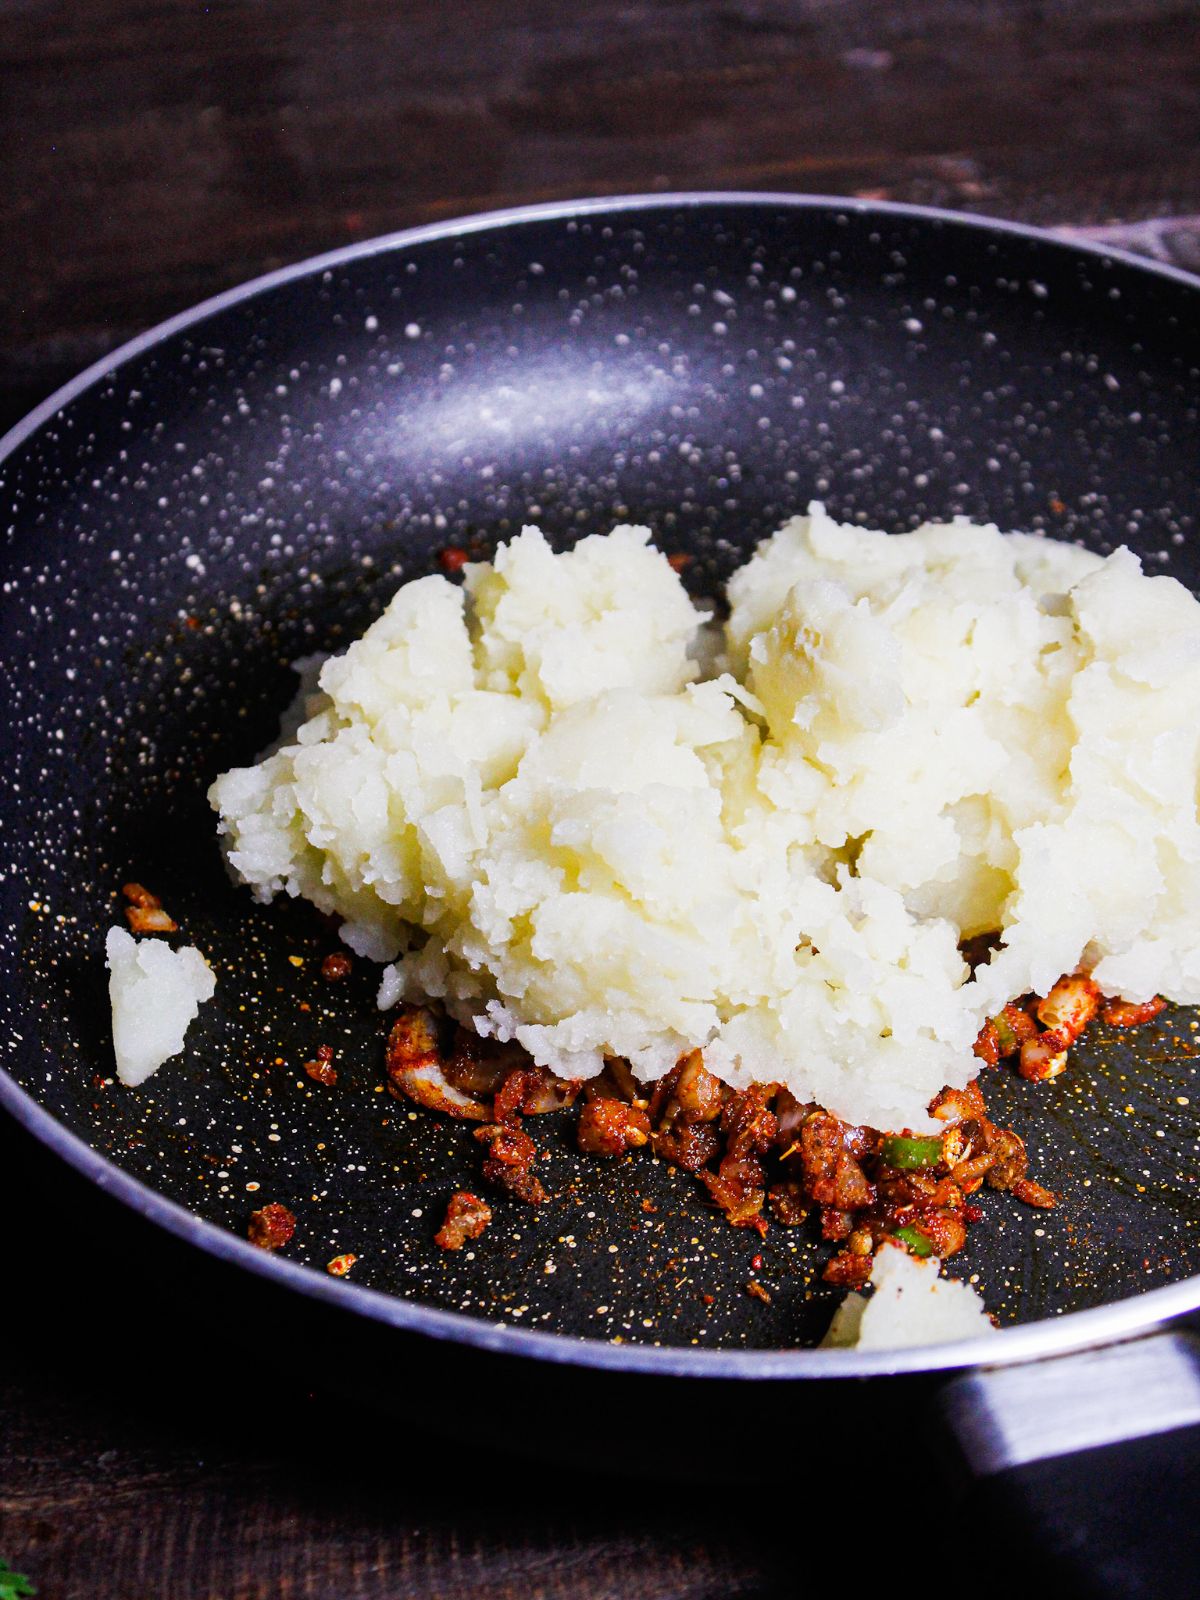 Add mashed potatoes to the pan and mix well